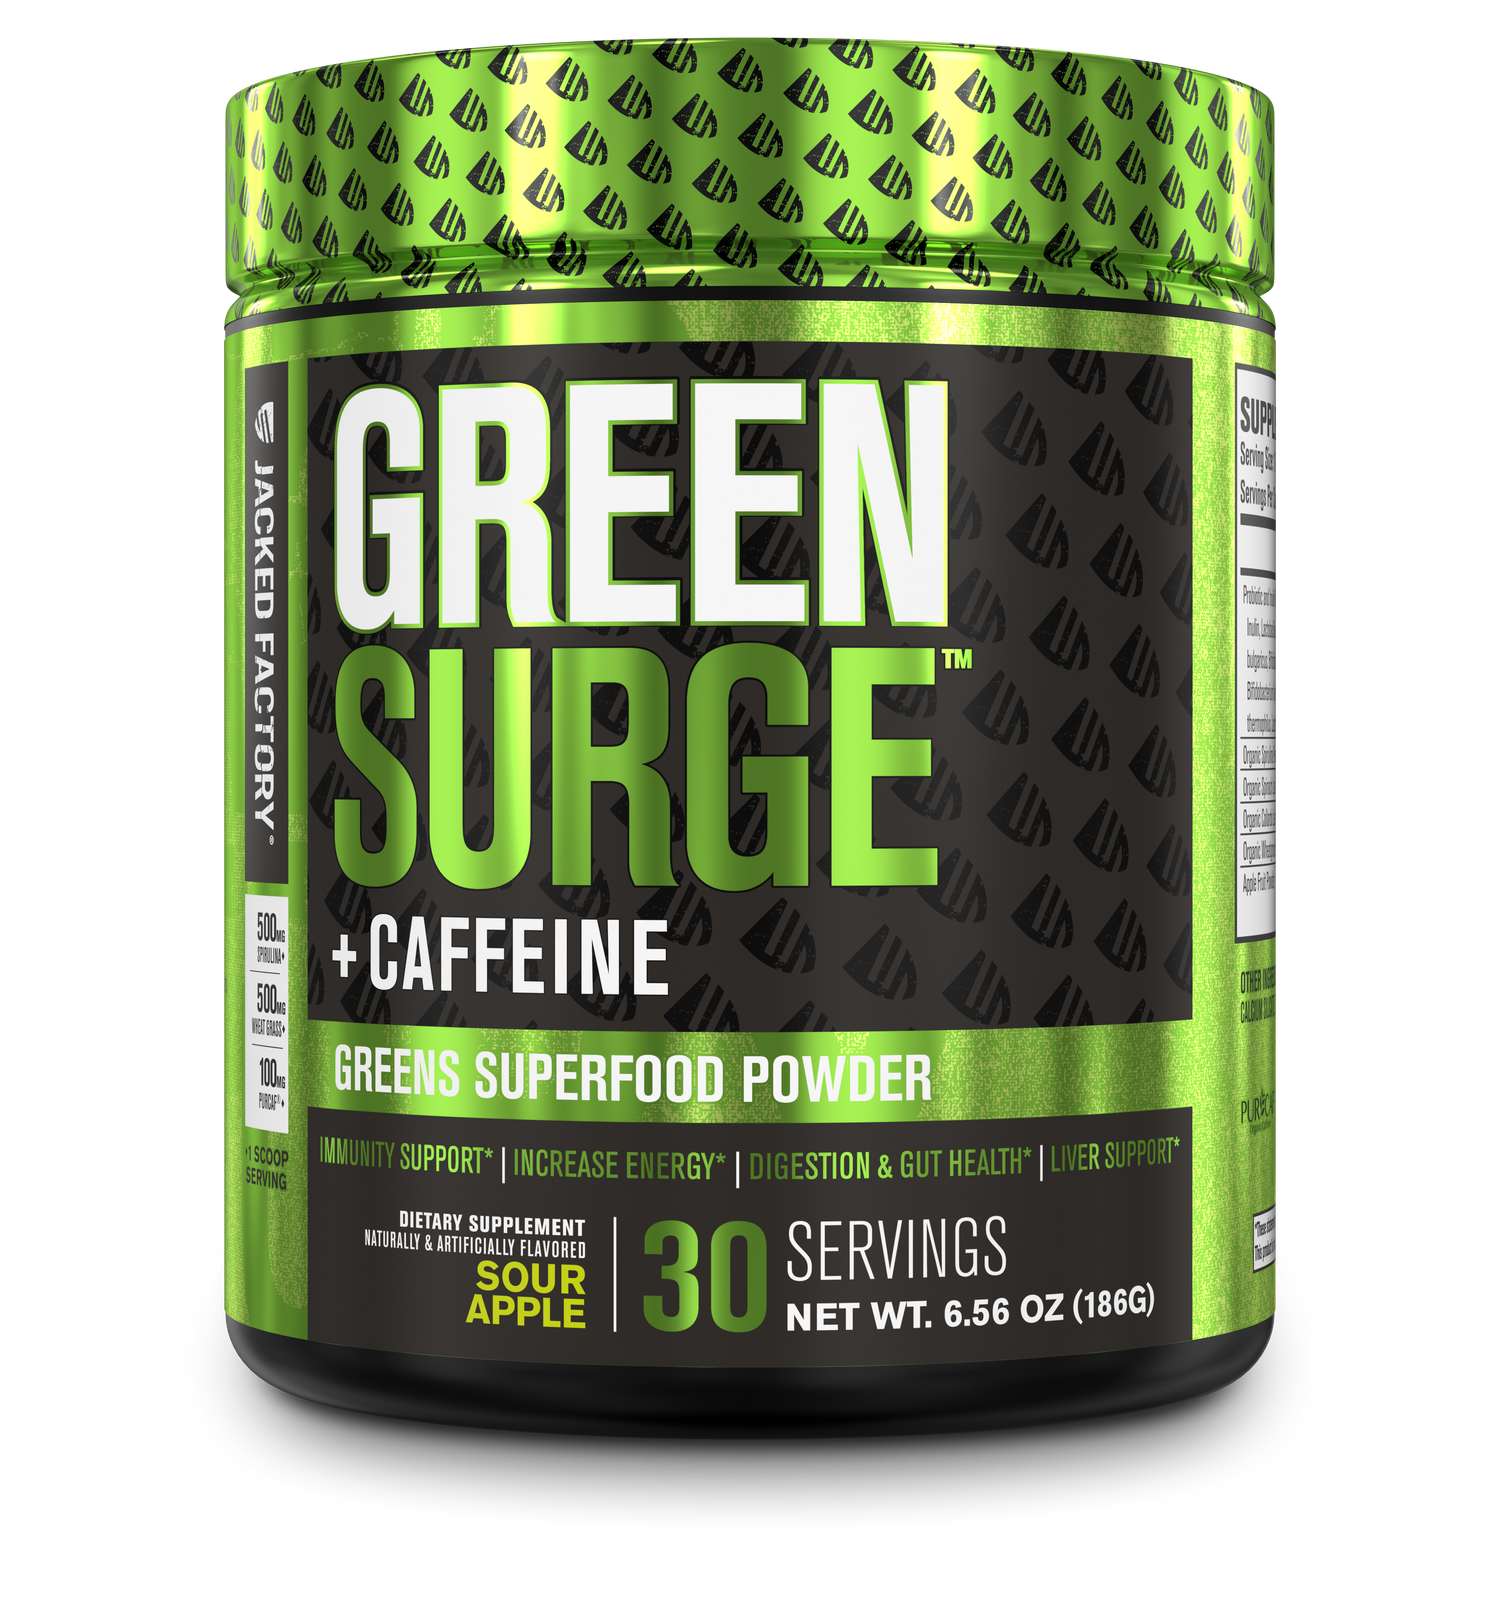 Jacked Factory's Sour Apple Green Surge + Caffeine powder (30 servings) in a black bottle with green label